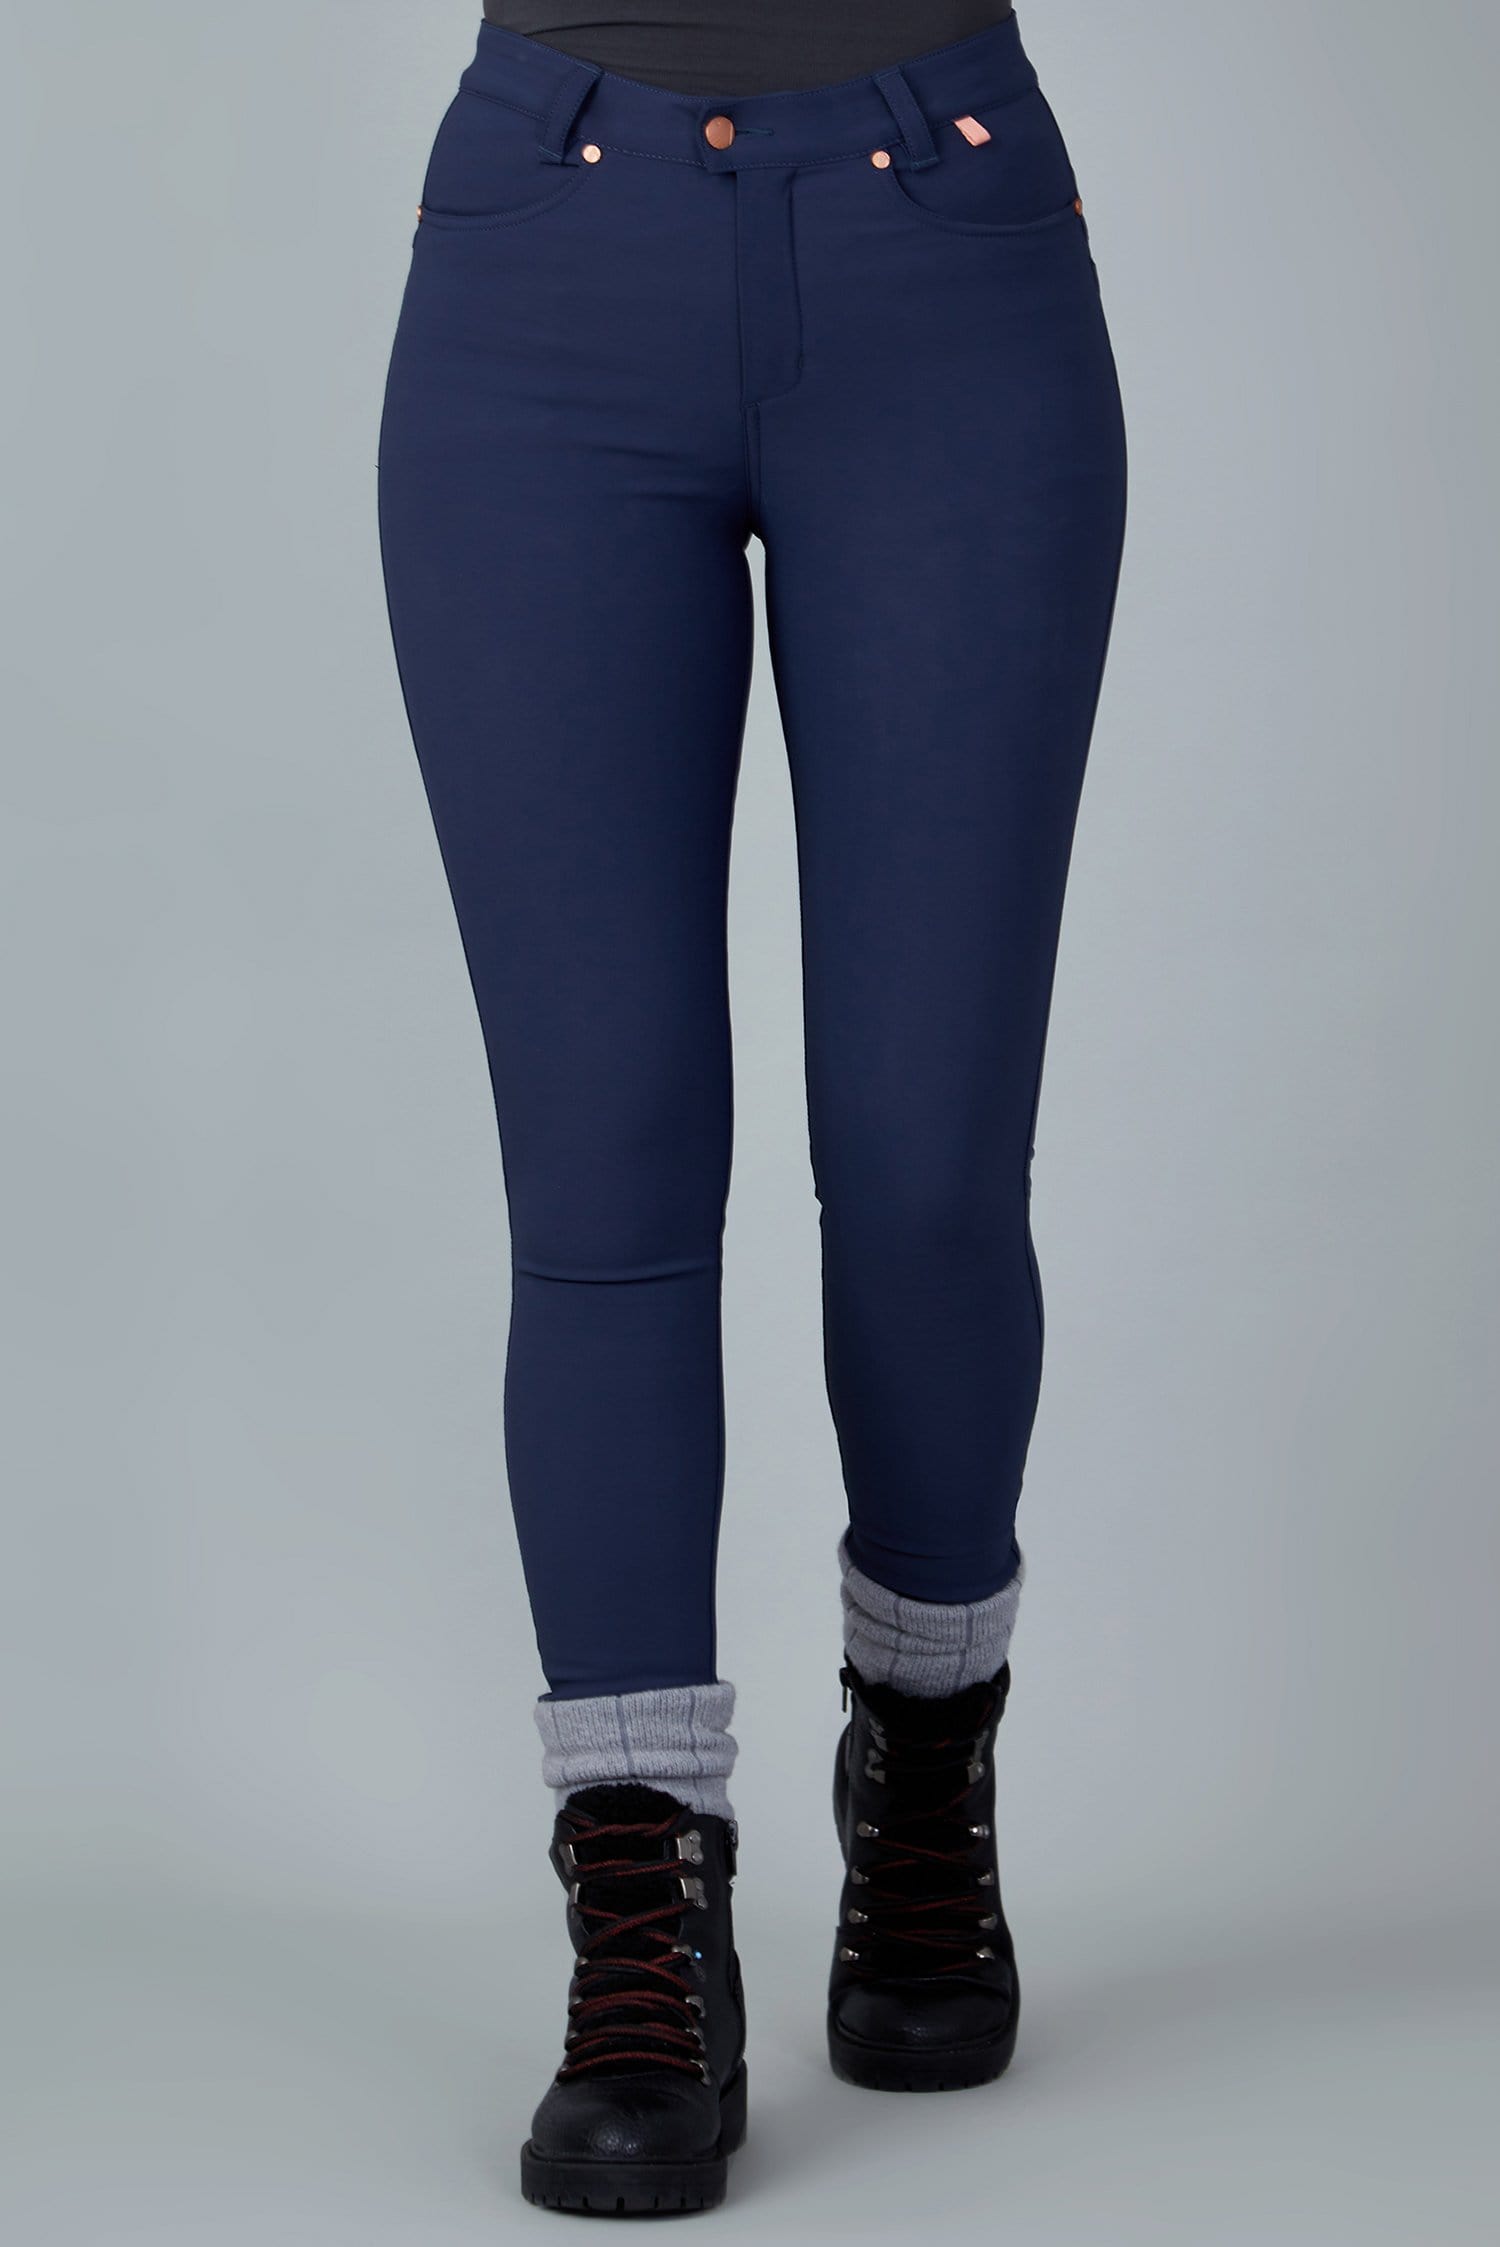 The Aventurite Stretch Skinny Outdoor Trousers - Midnight Blue - 32p / Uk14 - Womens - Acai Outdoorwear